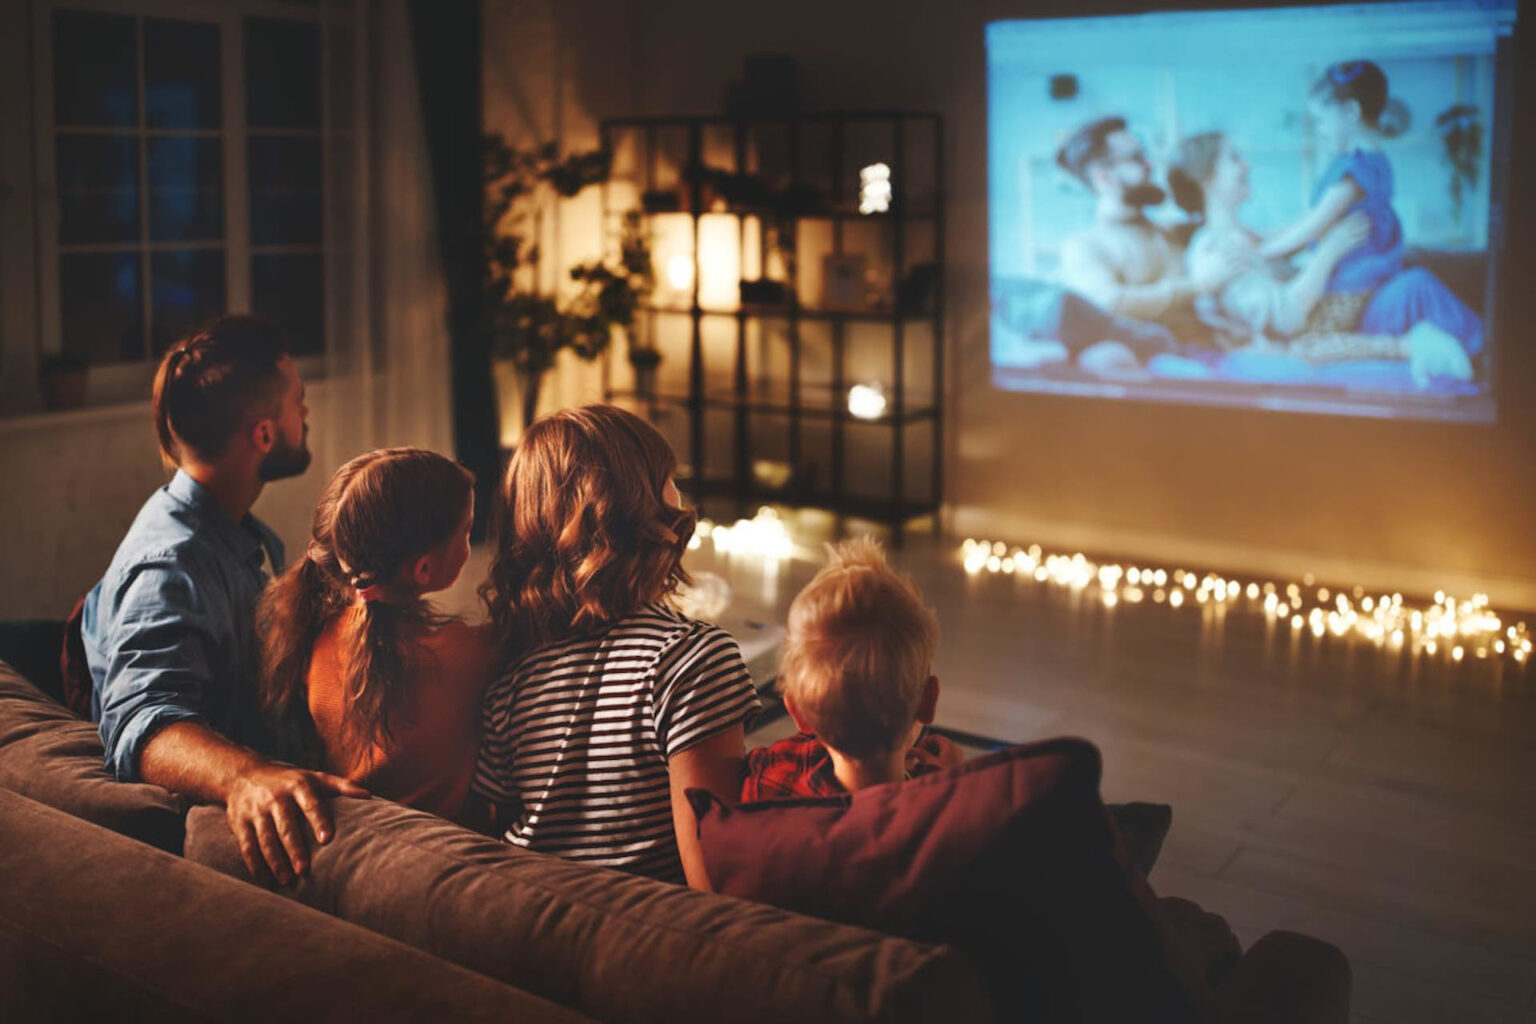 You could never go wrong with a movie night, so let's have one with the whole family! Grab the snacks and check out these all-time classic PG movies.